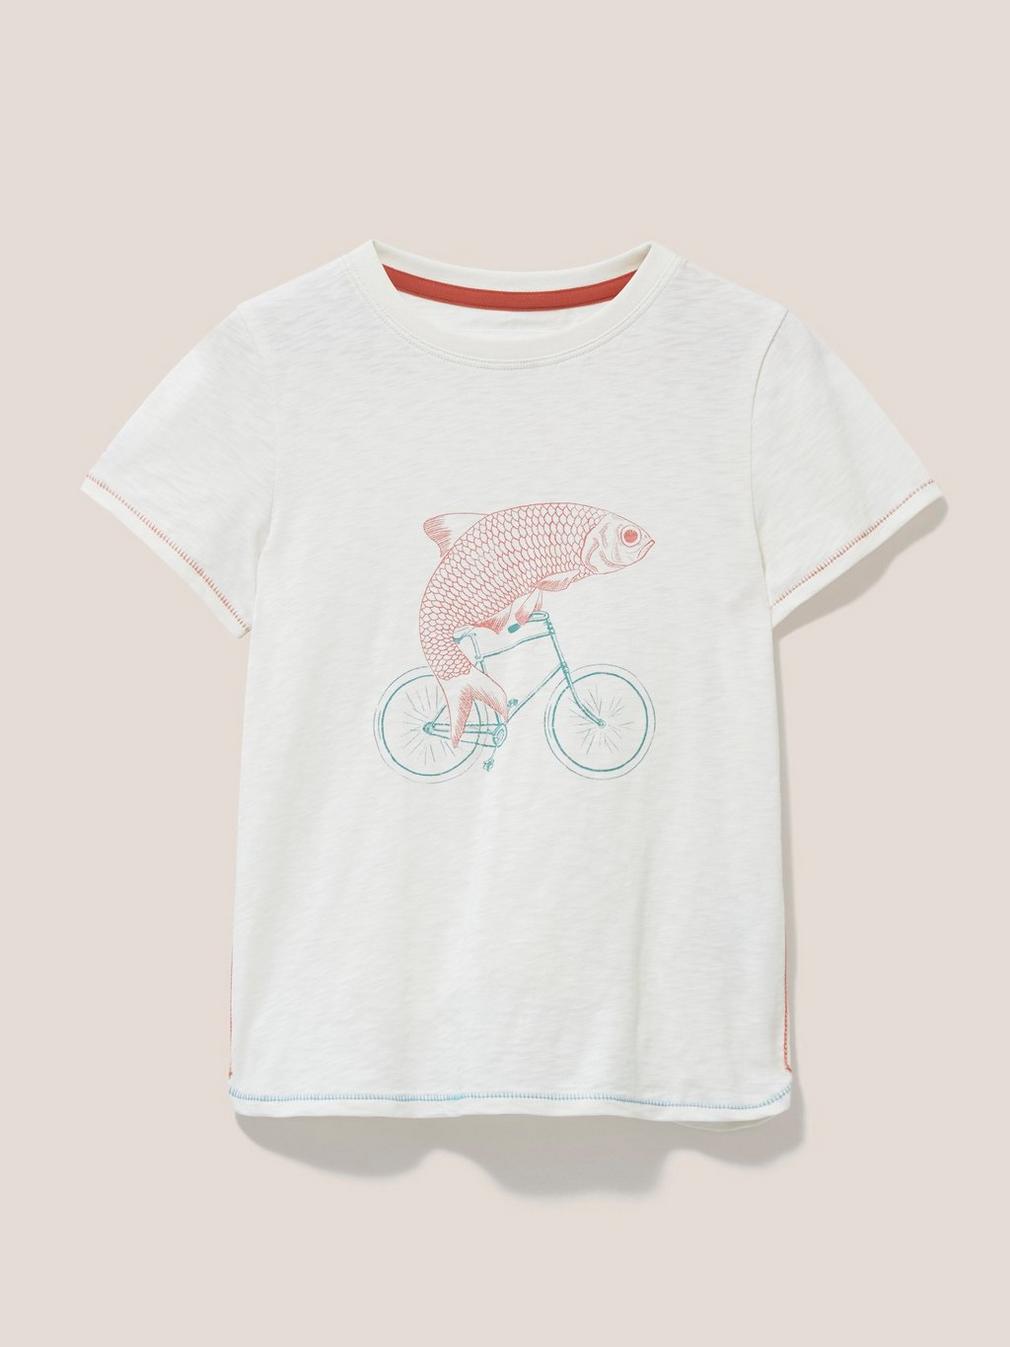 Fish On A Bike Graphic Teeshirt in WHITE PR - FLAT FRONT